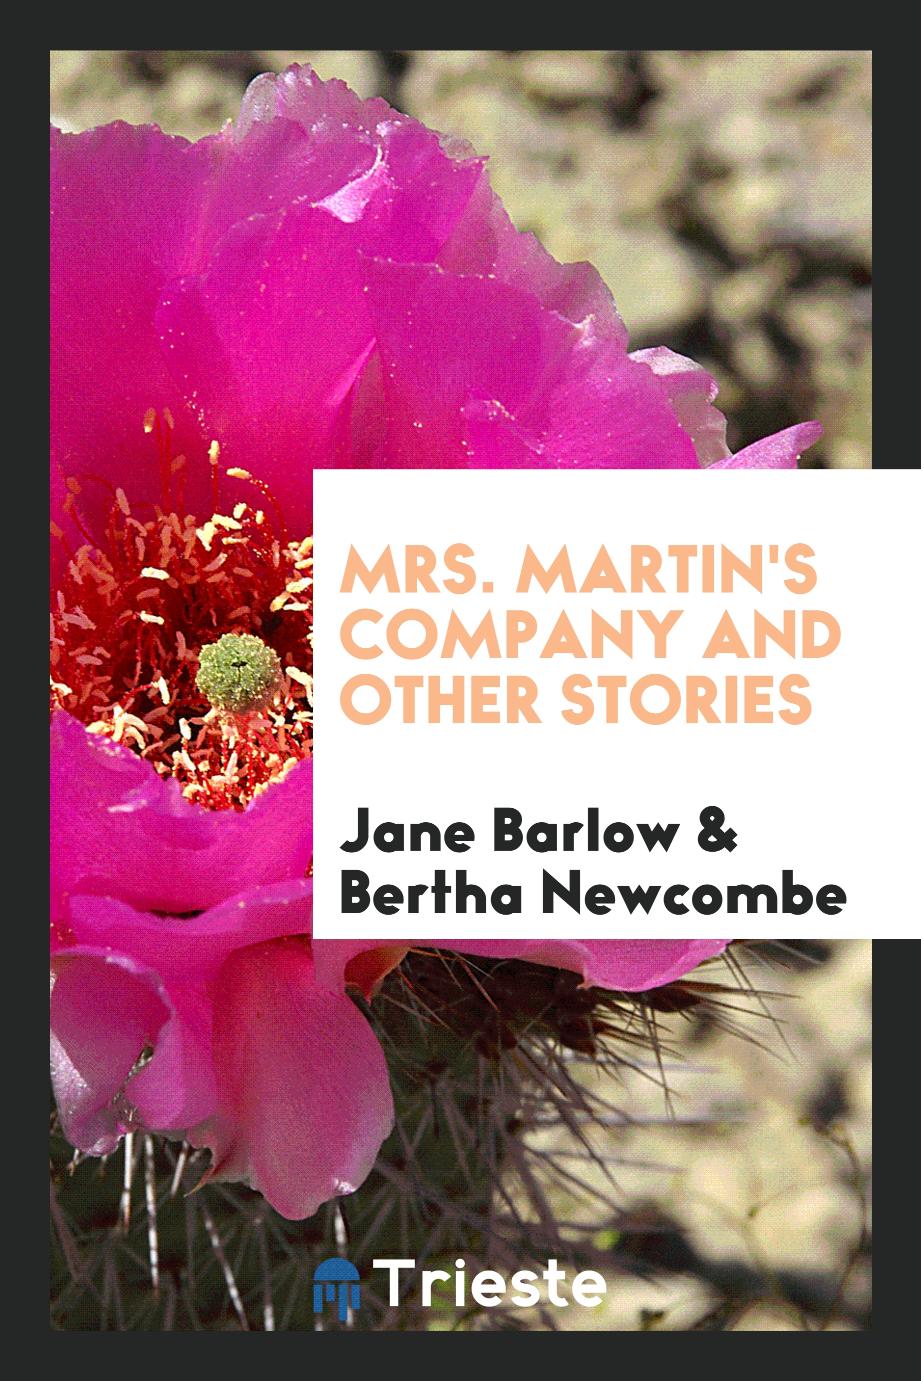 Mrs. Martin's Company and Other Stories